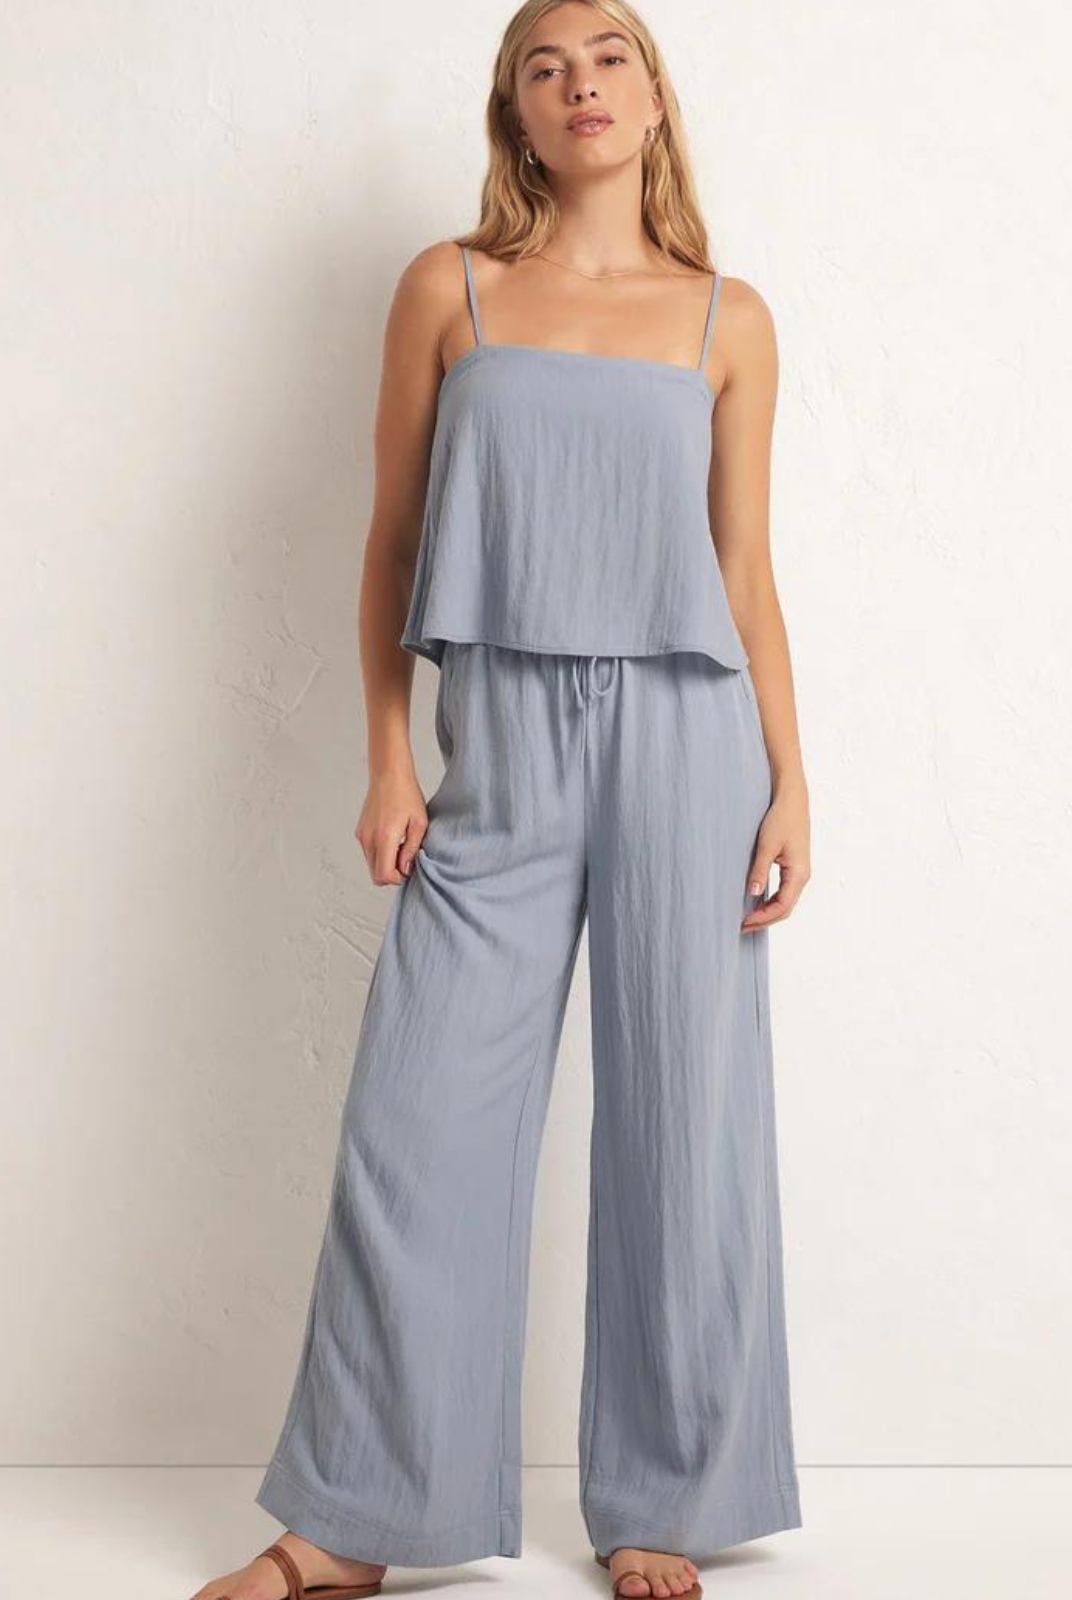 Z Supply Soleil Pant When you want lounge level comfort without sacrificing style, you'll want the Soleil Pant. Featuring an easy, pull-on design, this breezy wide leg pant can be styled up or down effortlessly.